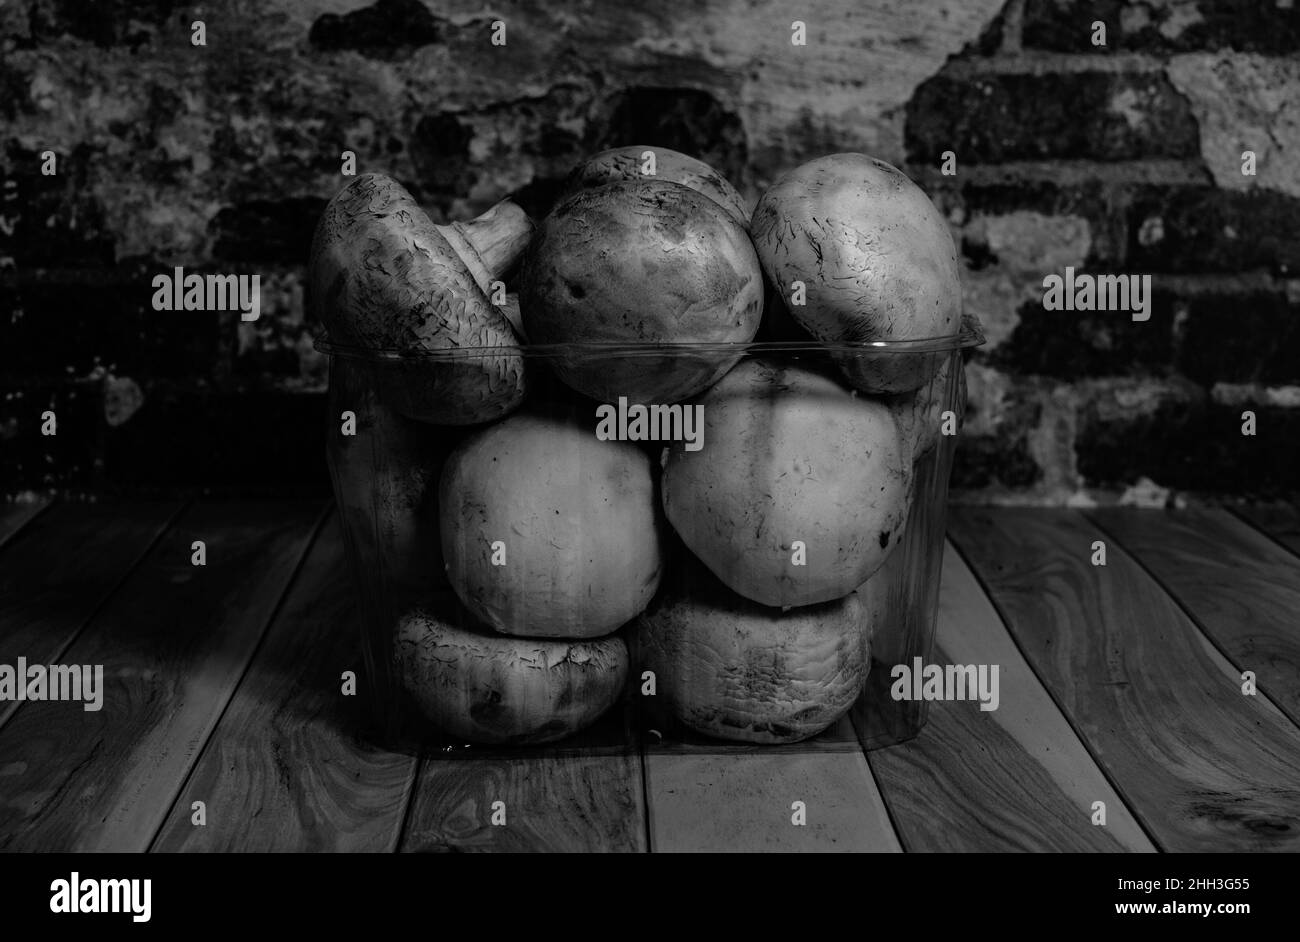 Fresh champignons lie on the table against the background of a brick wall black and white photography close-up Stock Photo